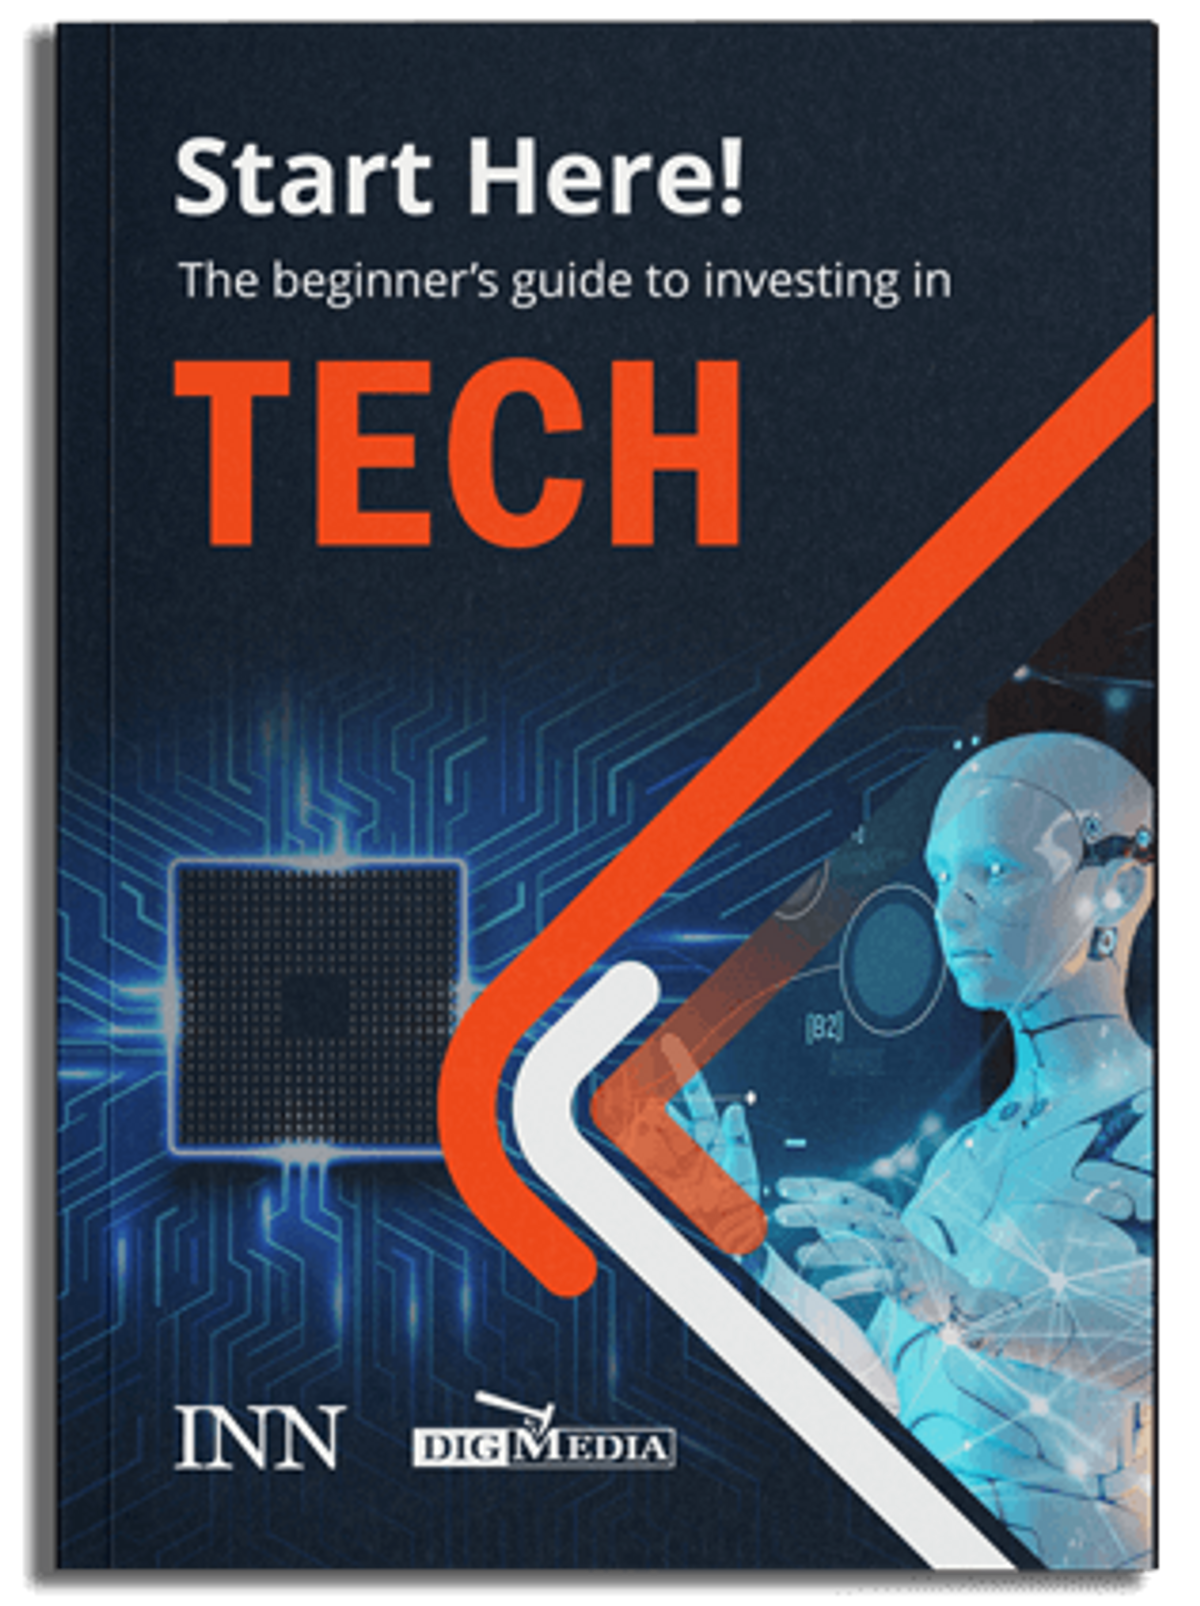  The Beginner's Guide to Investing In Tech